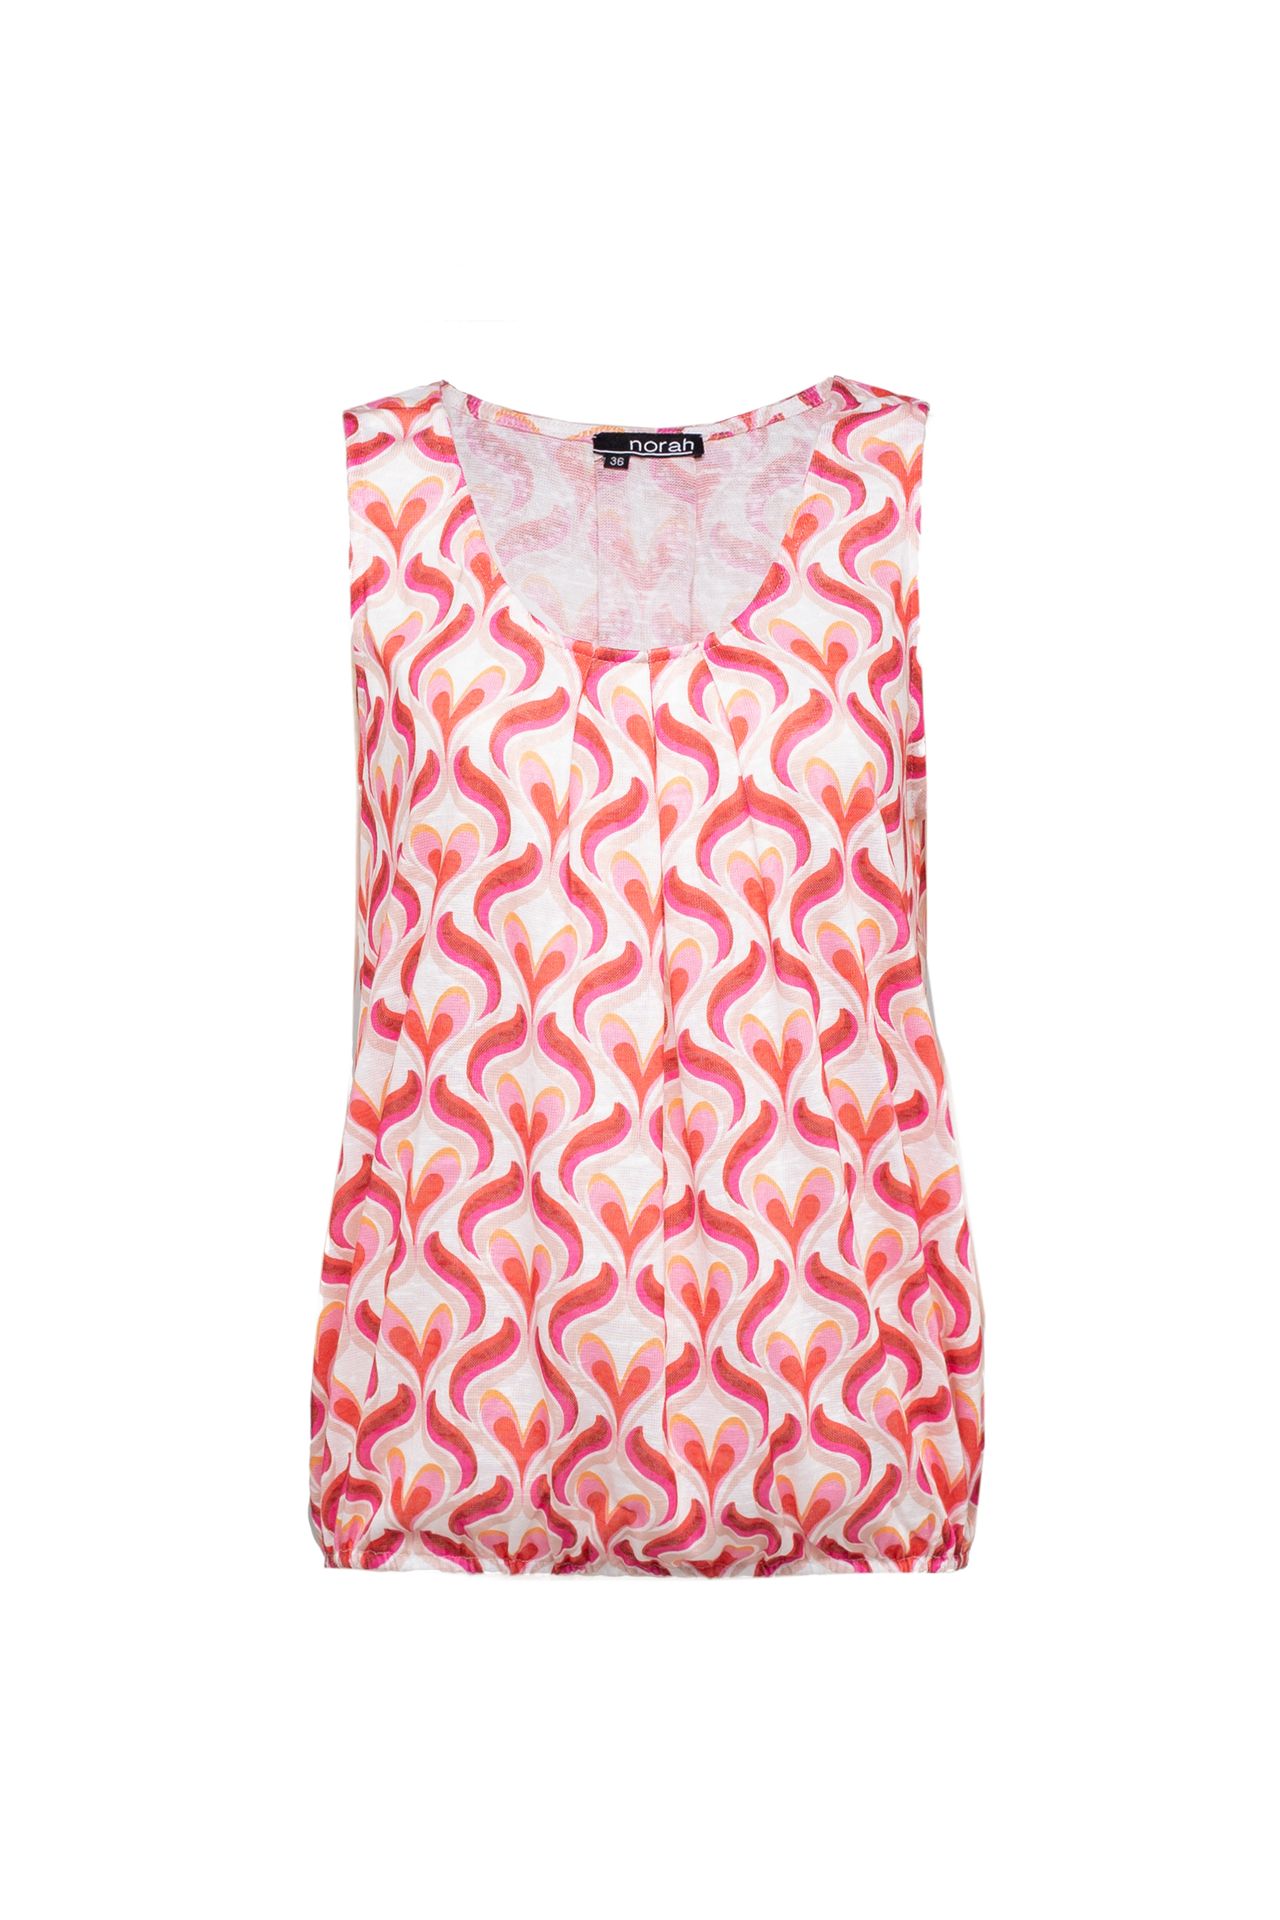 Norah Top roze rood pink/red 212975-936